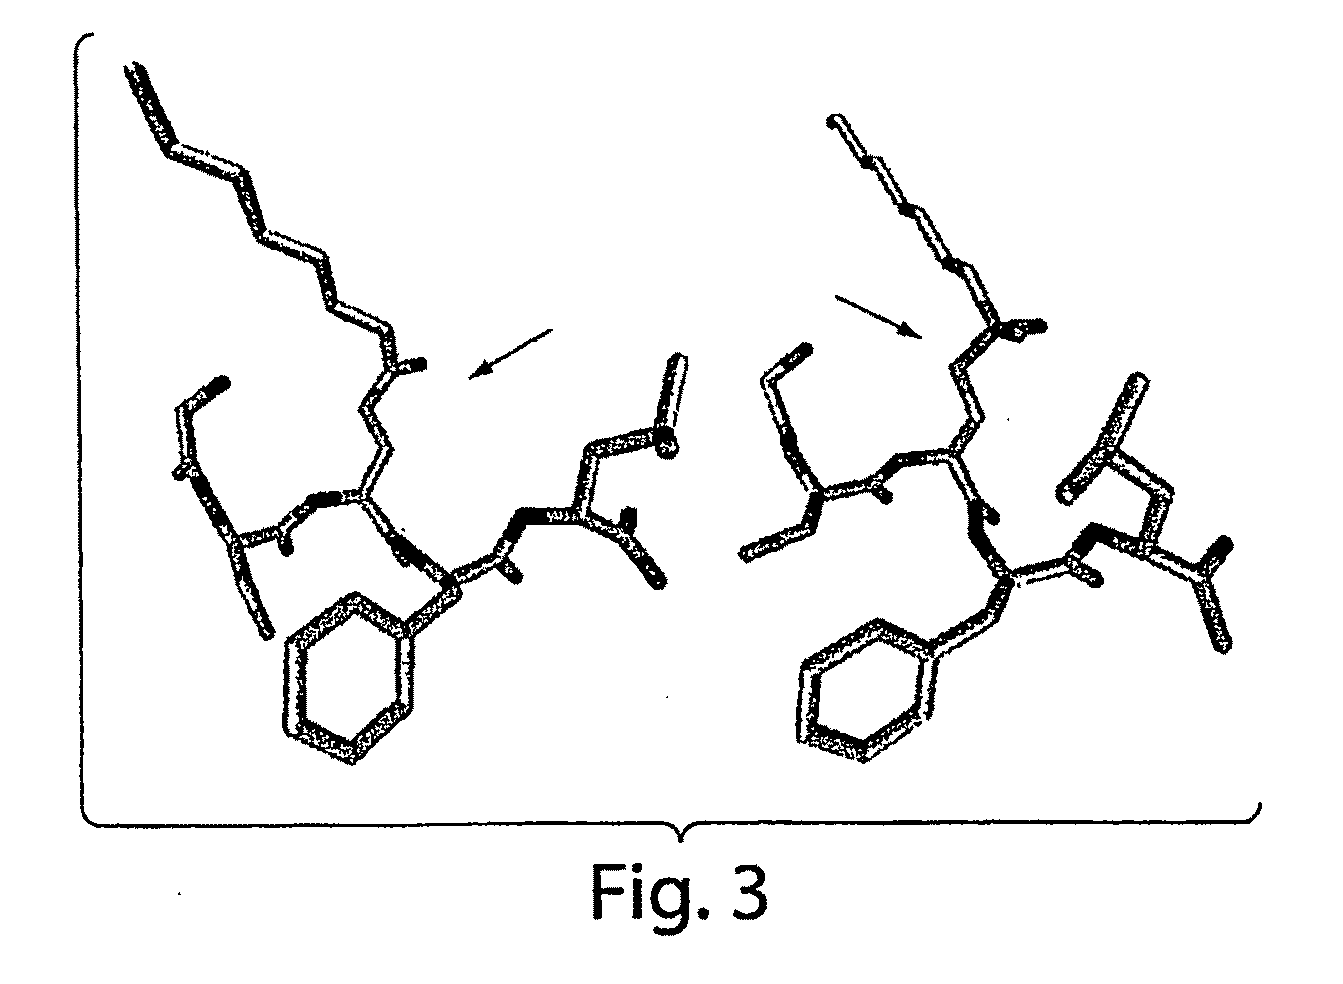 Compositions and Methods for Binding or Inactivating Ghrelin